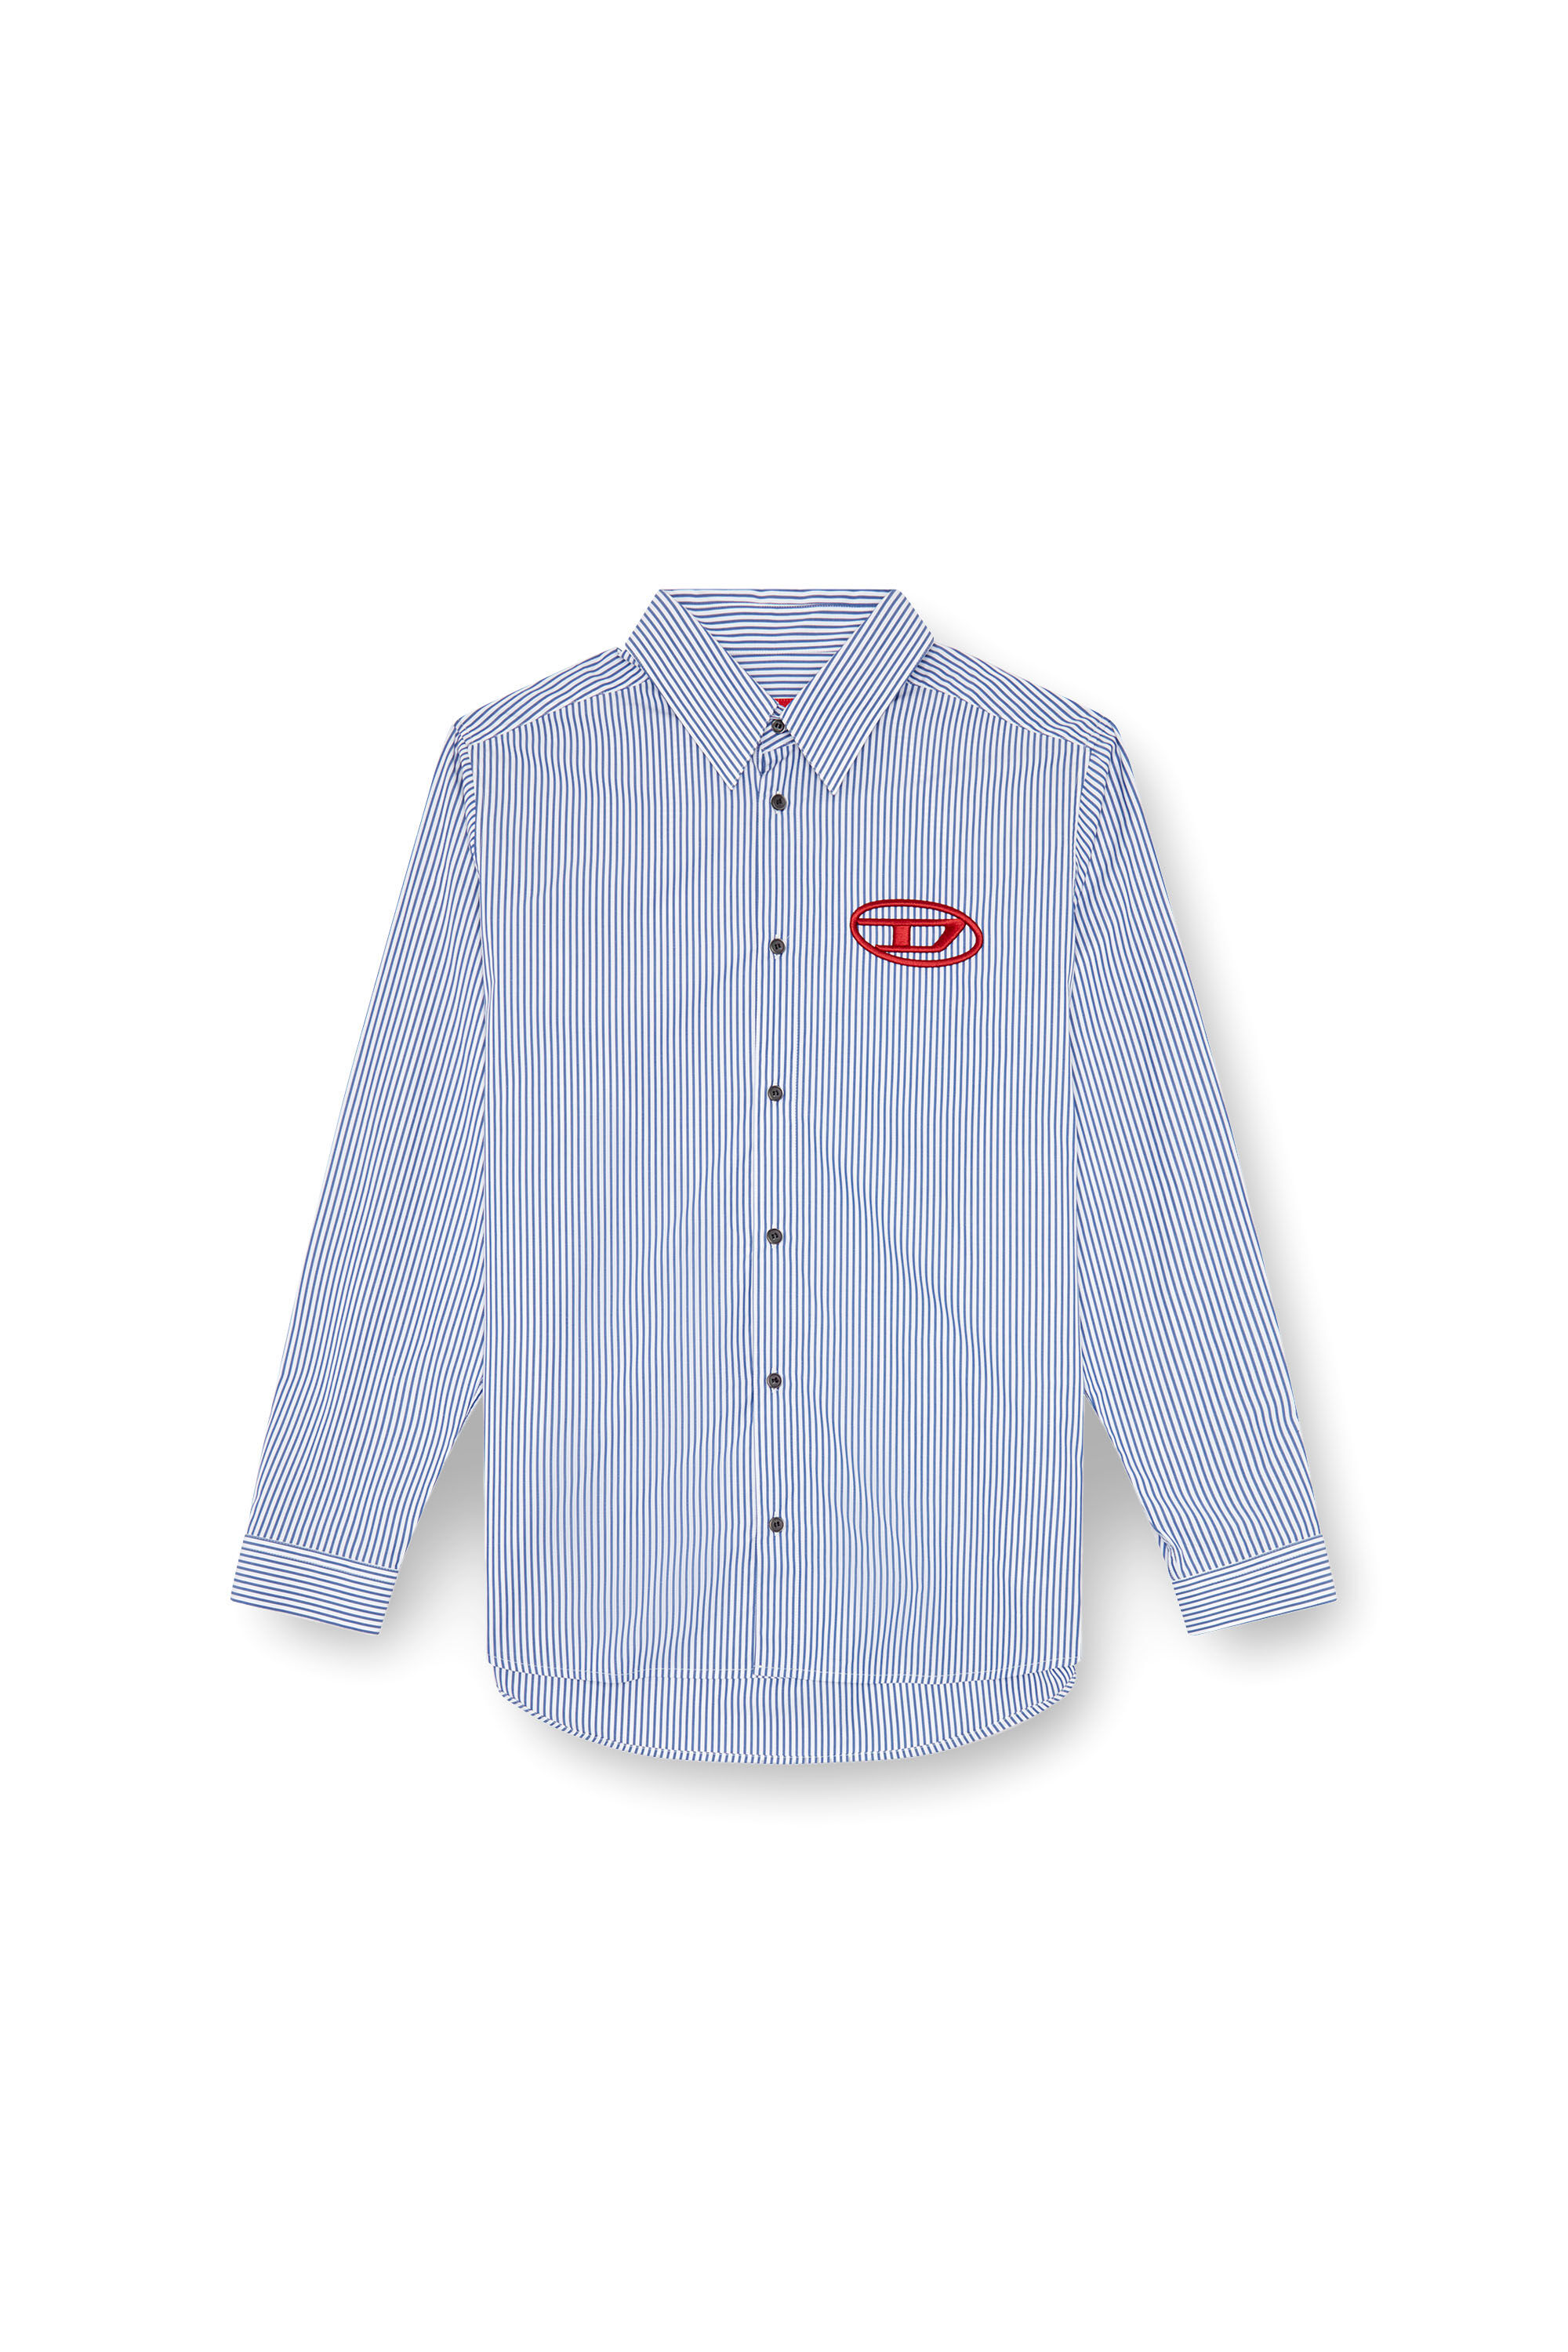 Diesel - S-SIMPLY-E, Man Striped shirt with Oval D embroidery in Blue - Image 2